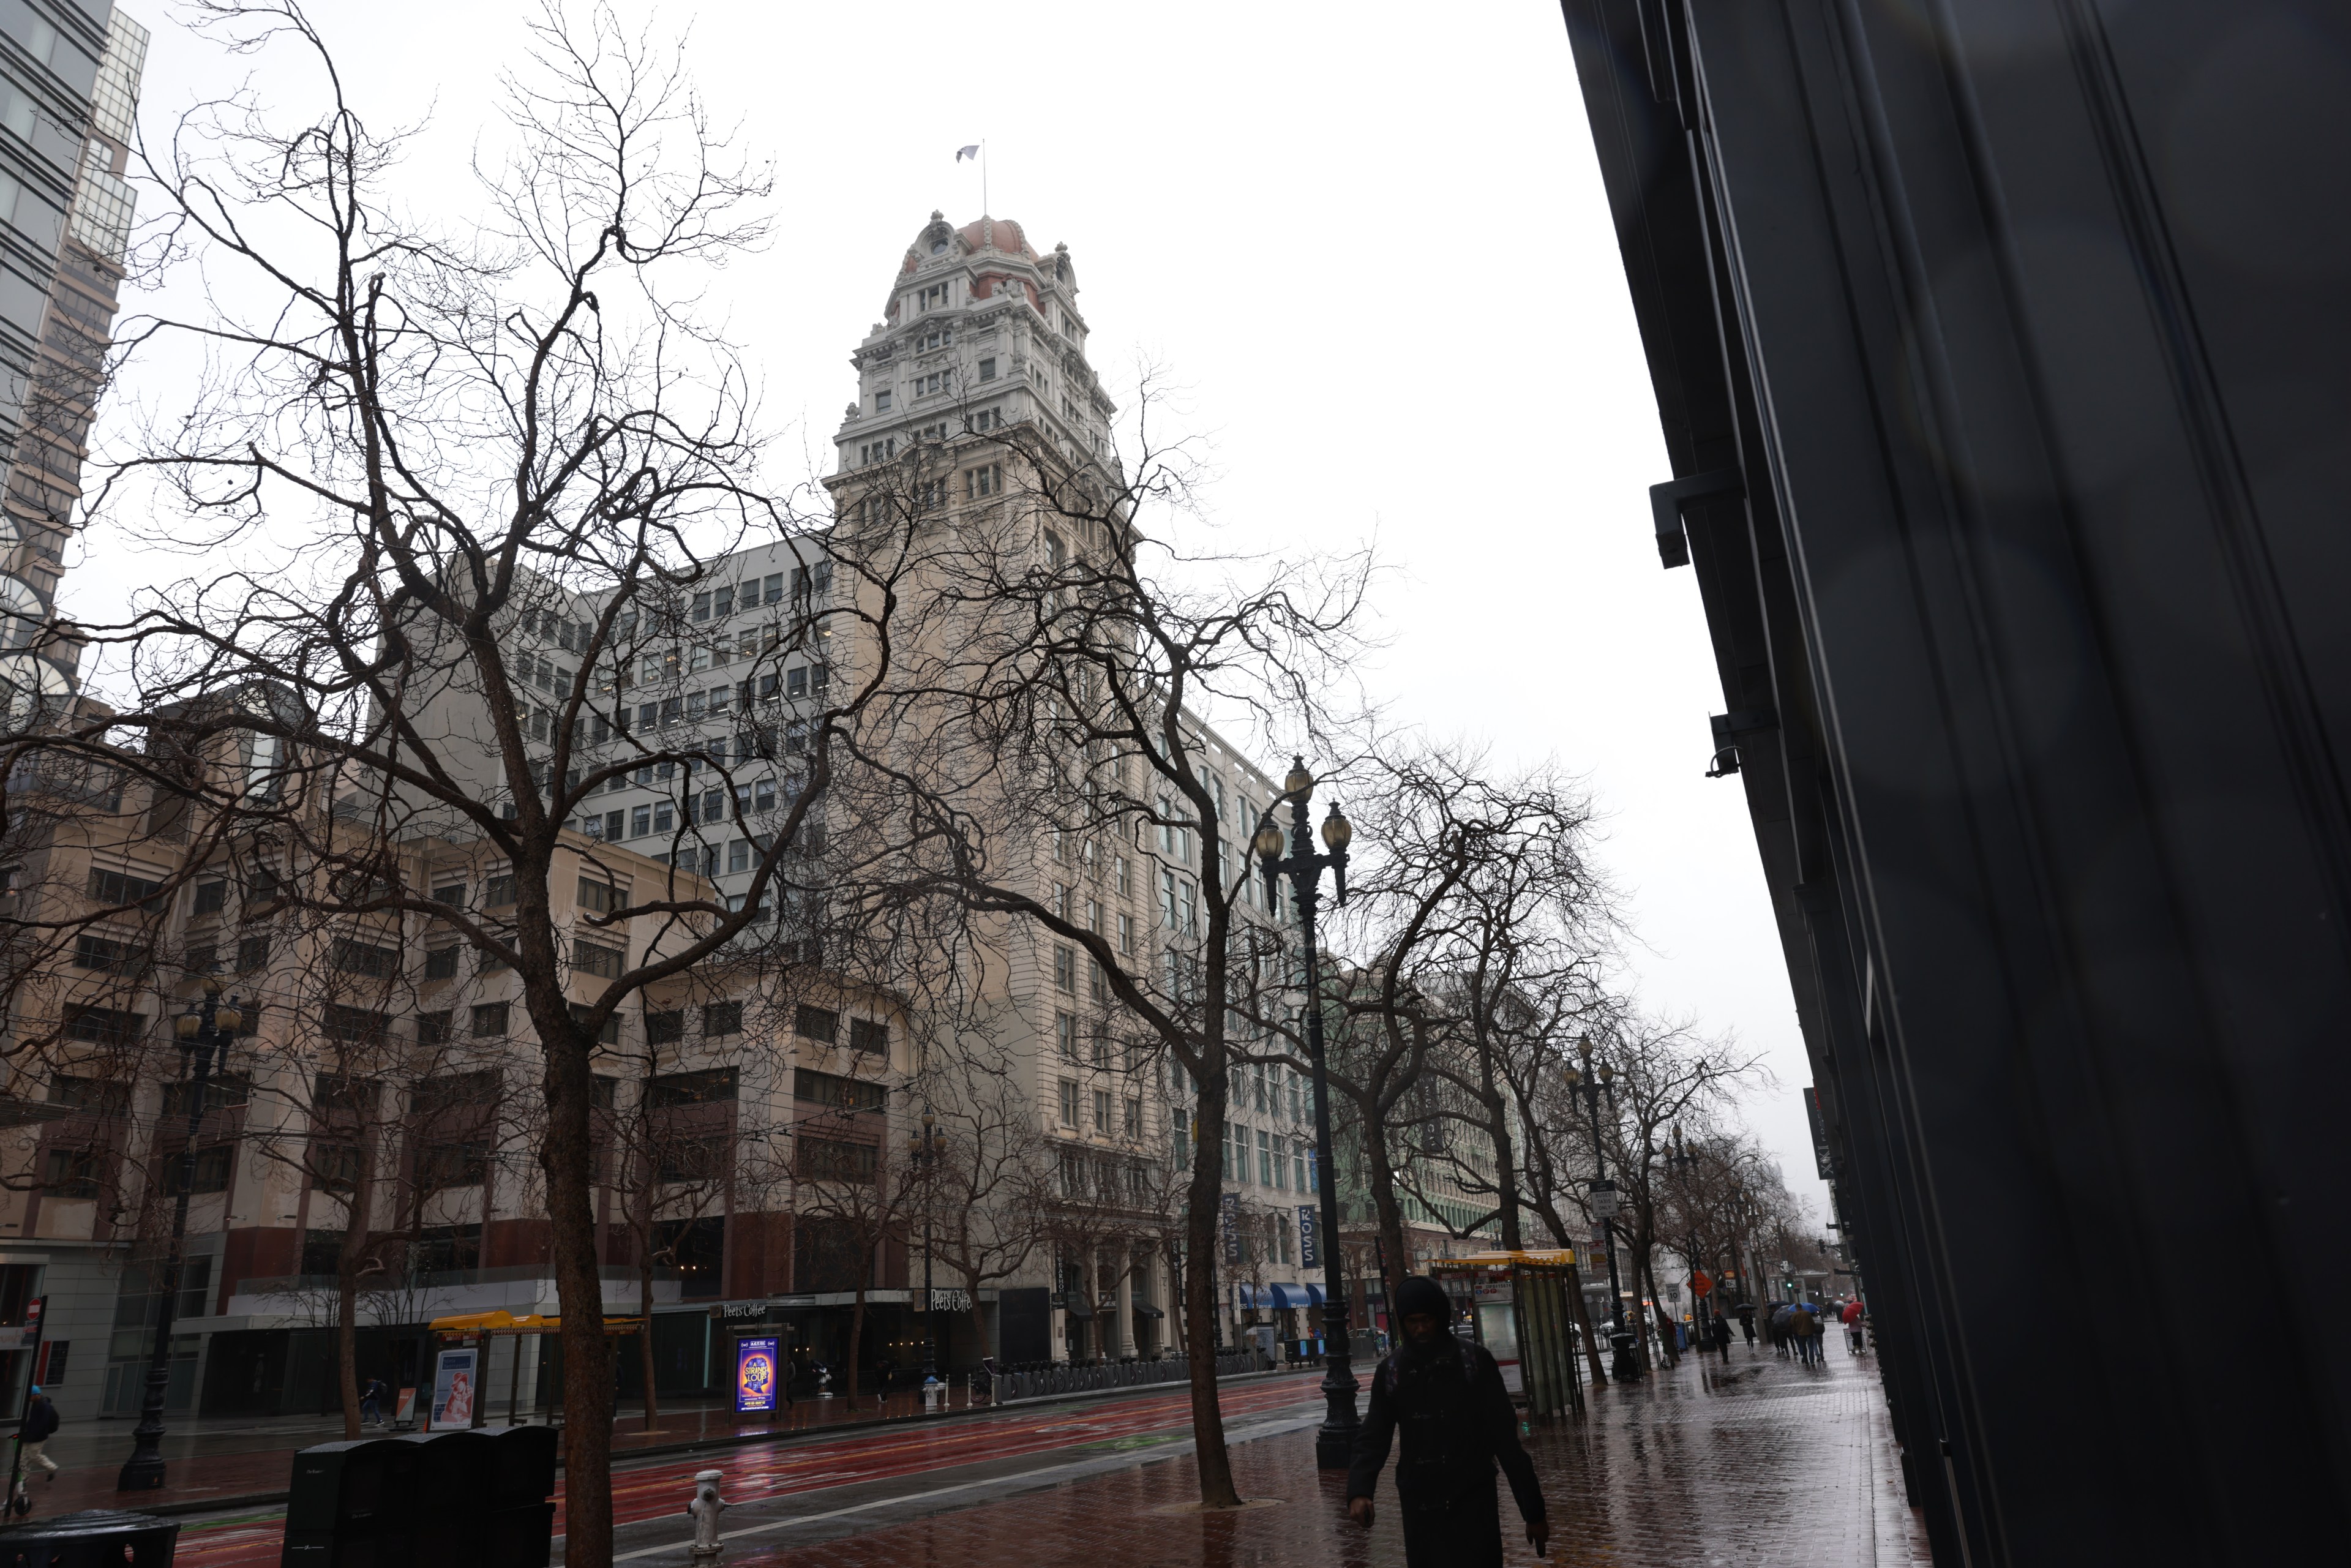 An overcast city scene with bare trees, a historic building, wet streets, and a person walking.